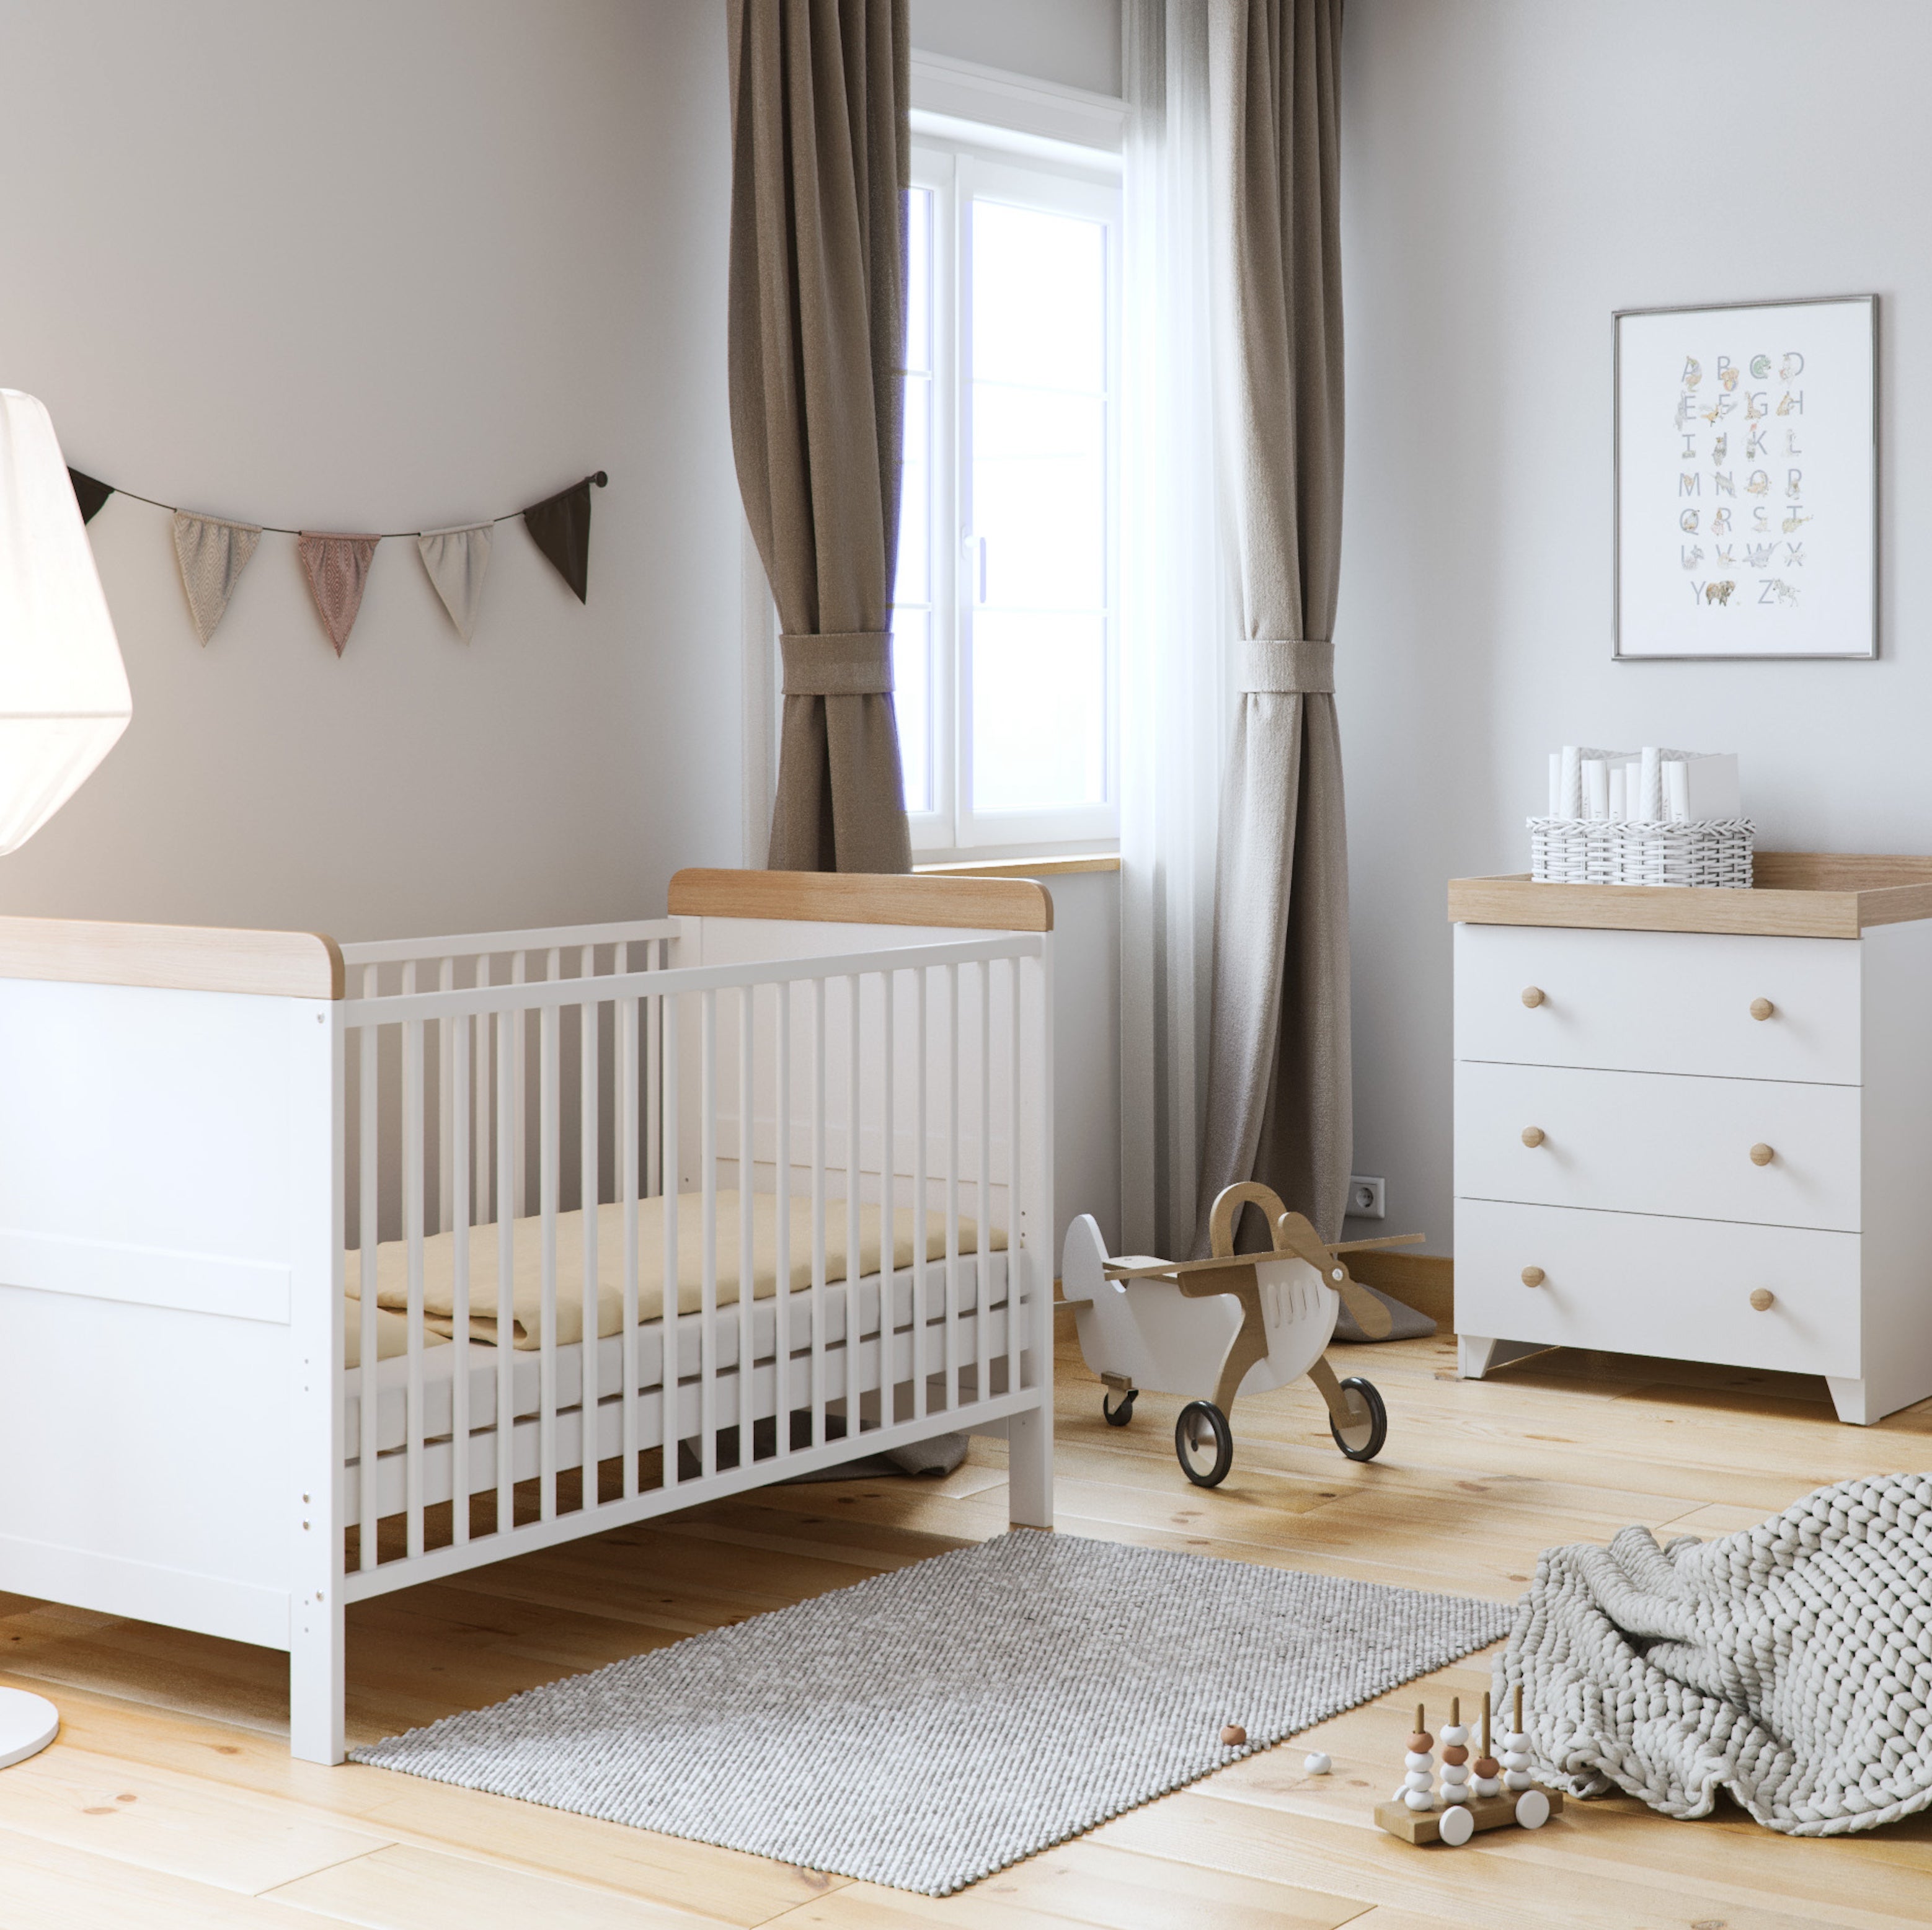 Little Acorns Classic Oak Effect Cot Bed and 3 Drawer Chest Nursery Set